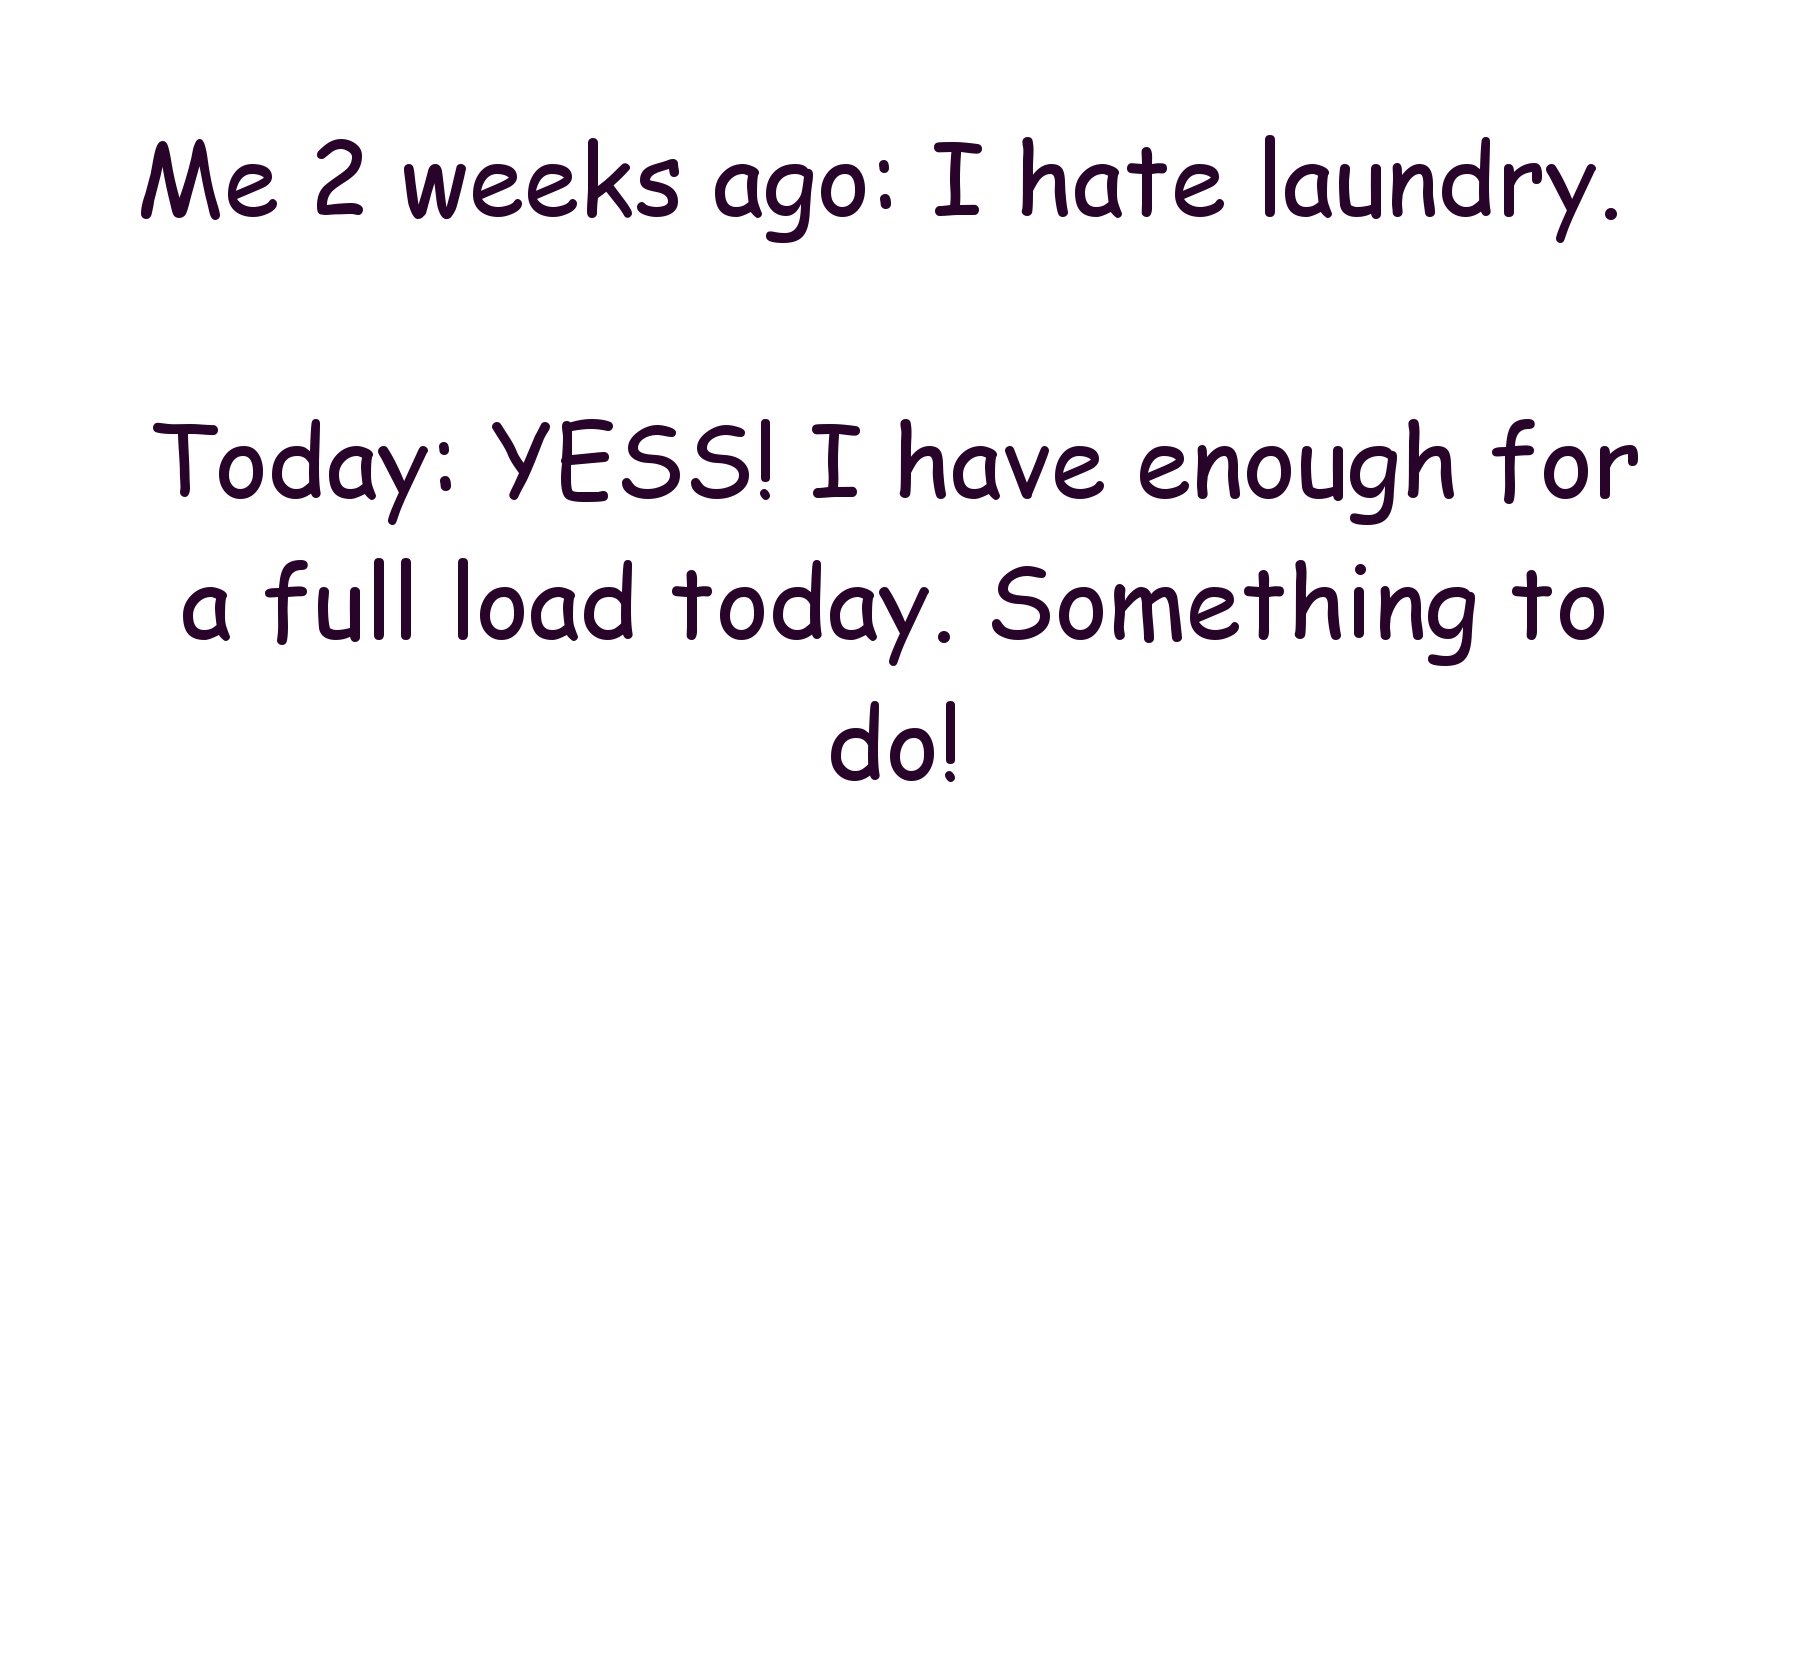 Electronegativity - Me 2 weeks ago I hate laundry. Today Yess! I have enough for a full load today. Something to do!